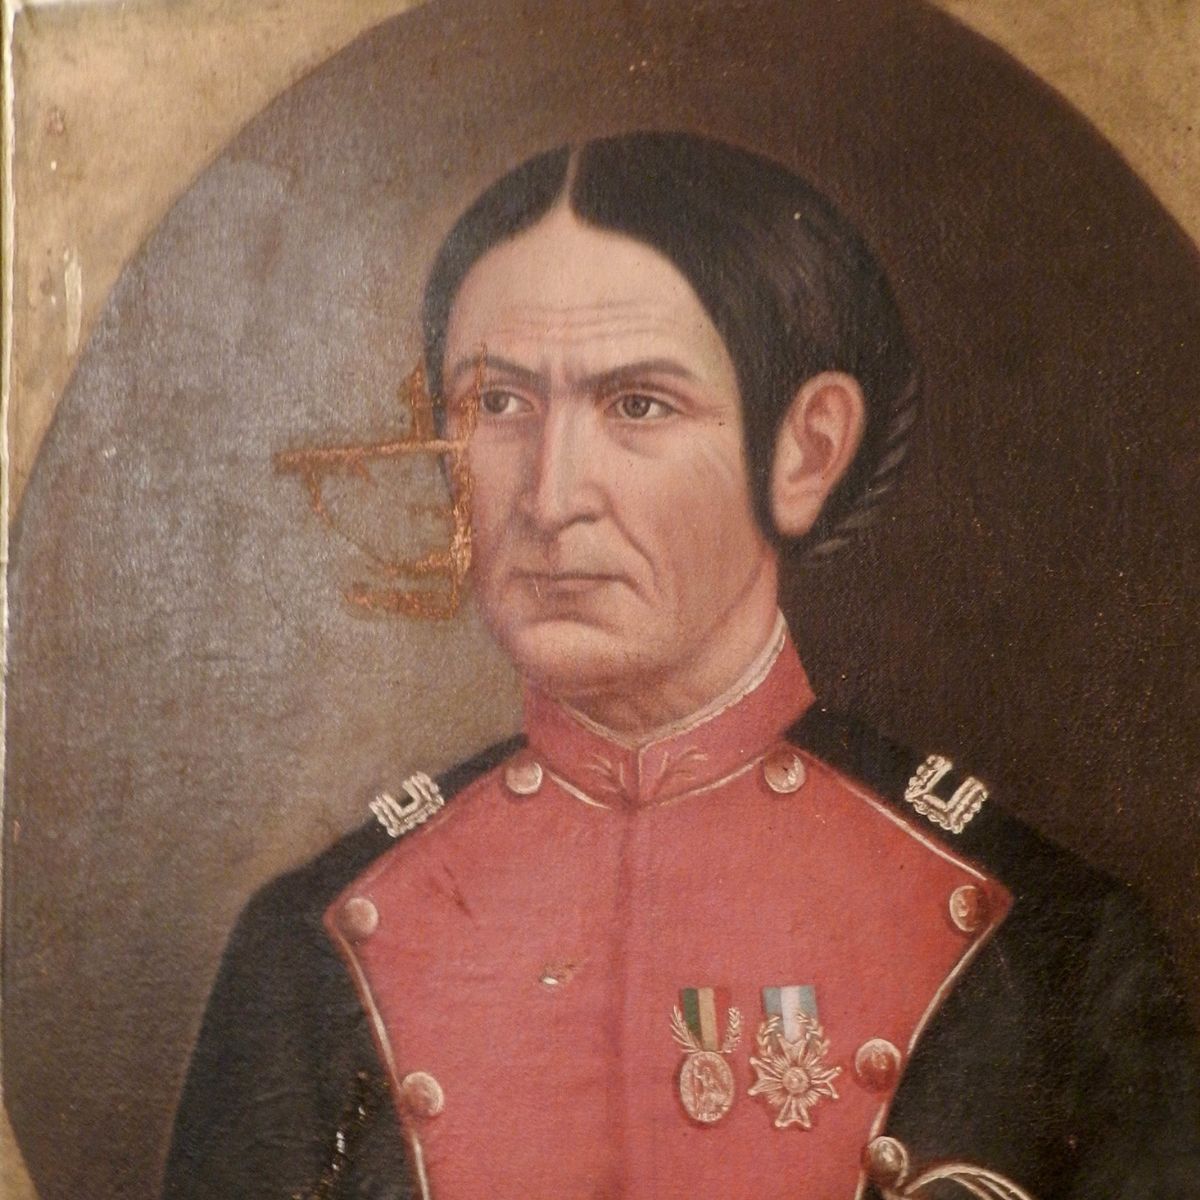 Juana Azurduy (1780-1862), also known as Juana Azurduy de Padilla, was a South American guerrilla leader who fought for independence from Spanish rule in the early 19th century. Portrait.